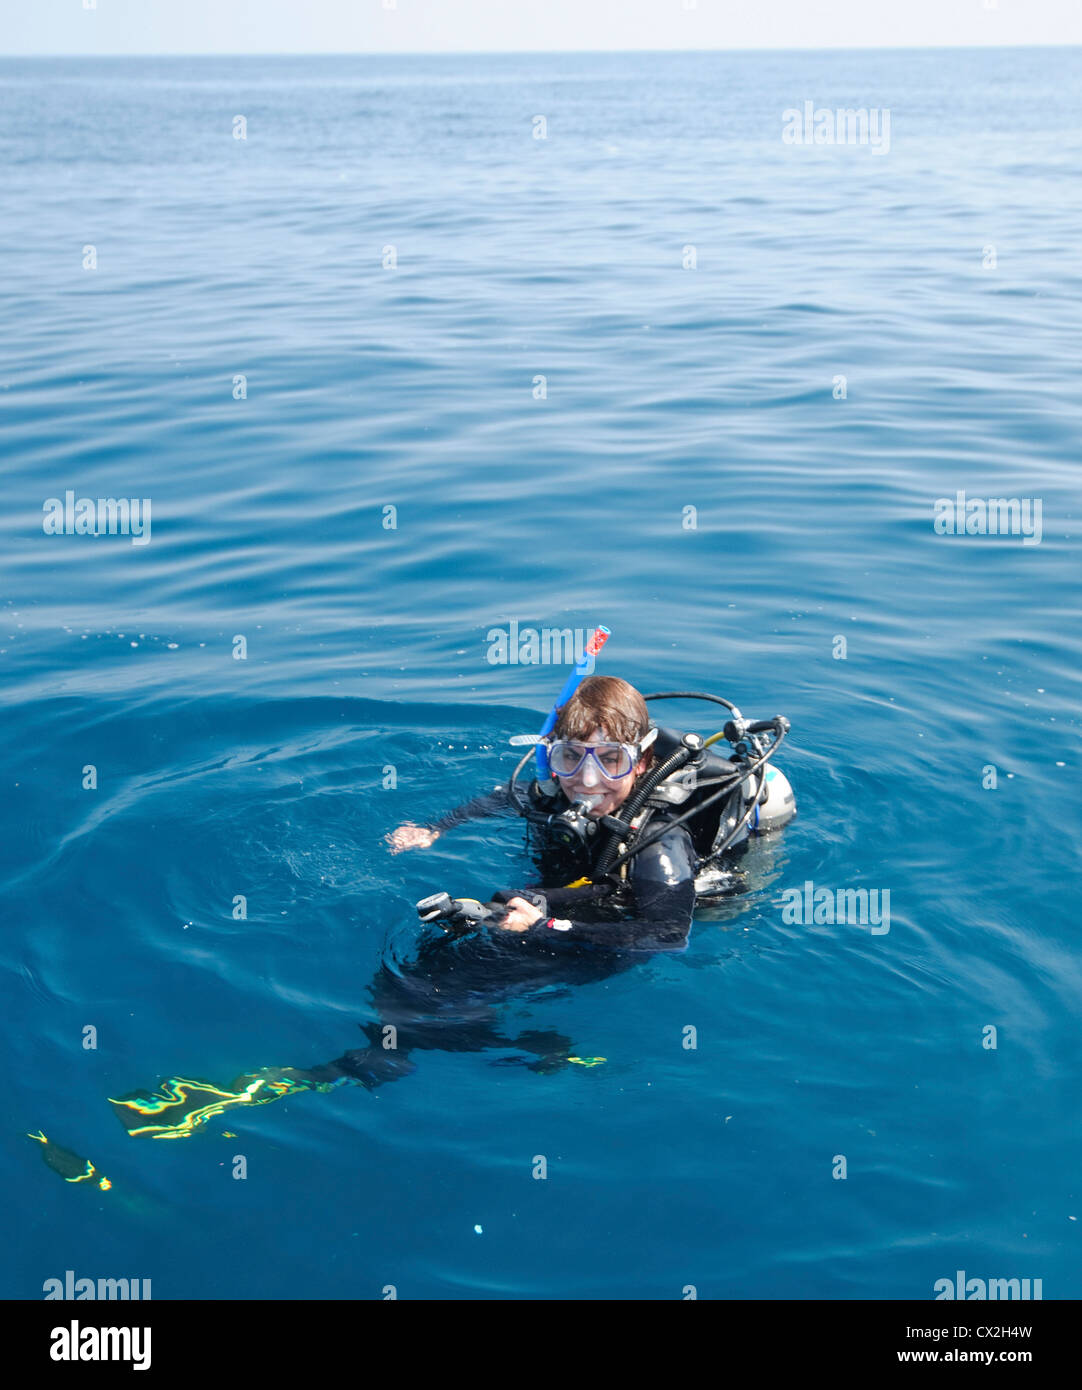 Scubadiver in the water Stock Photo